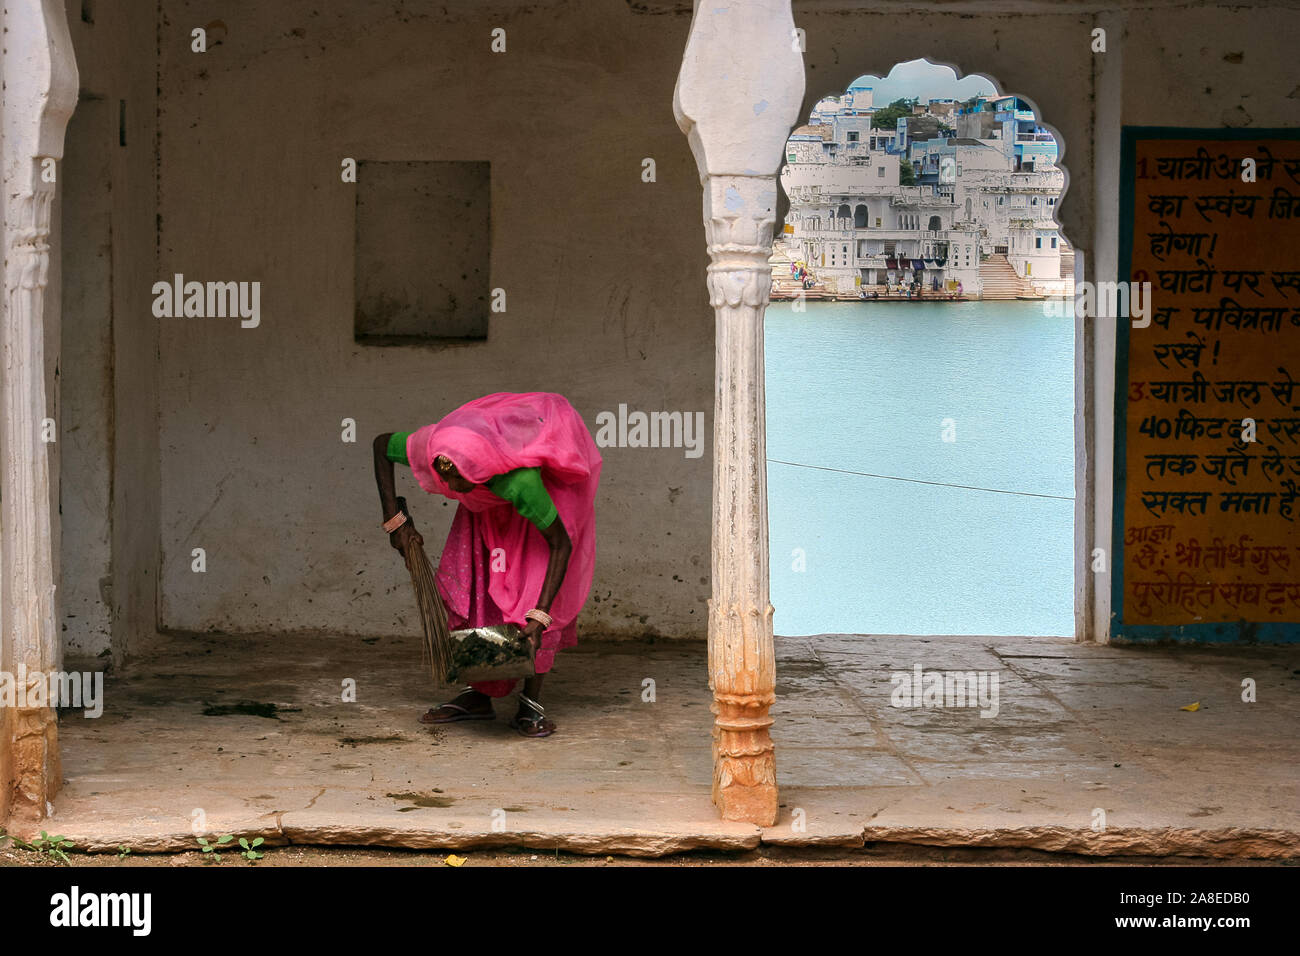 Pushkar, Rajasthan, India: an Indian woman cleaning the sidewalk Stock Photo